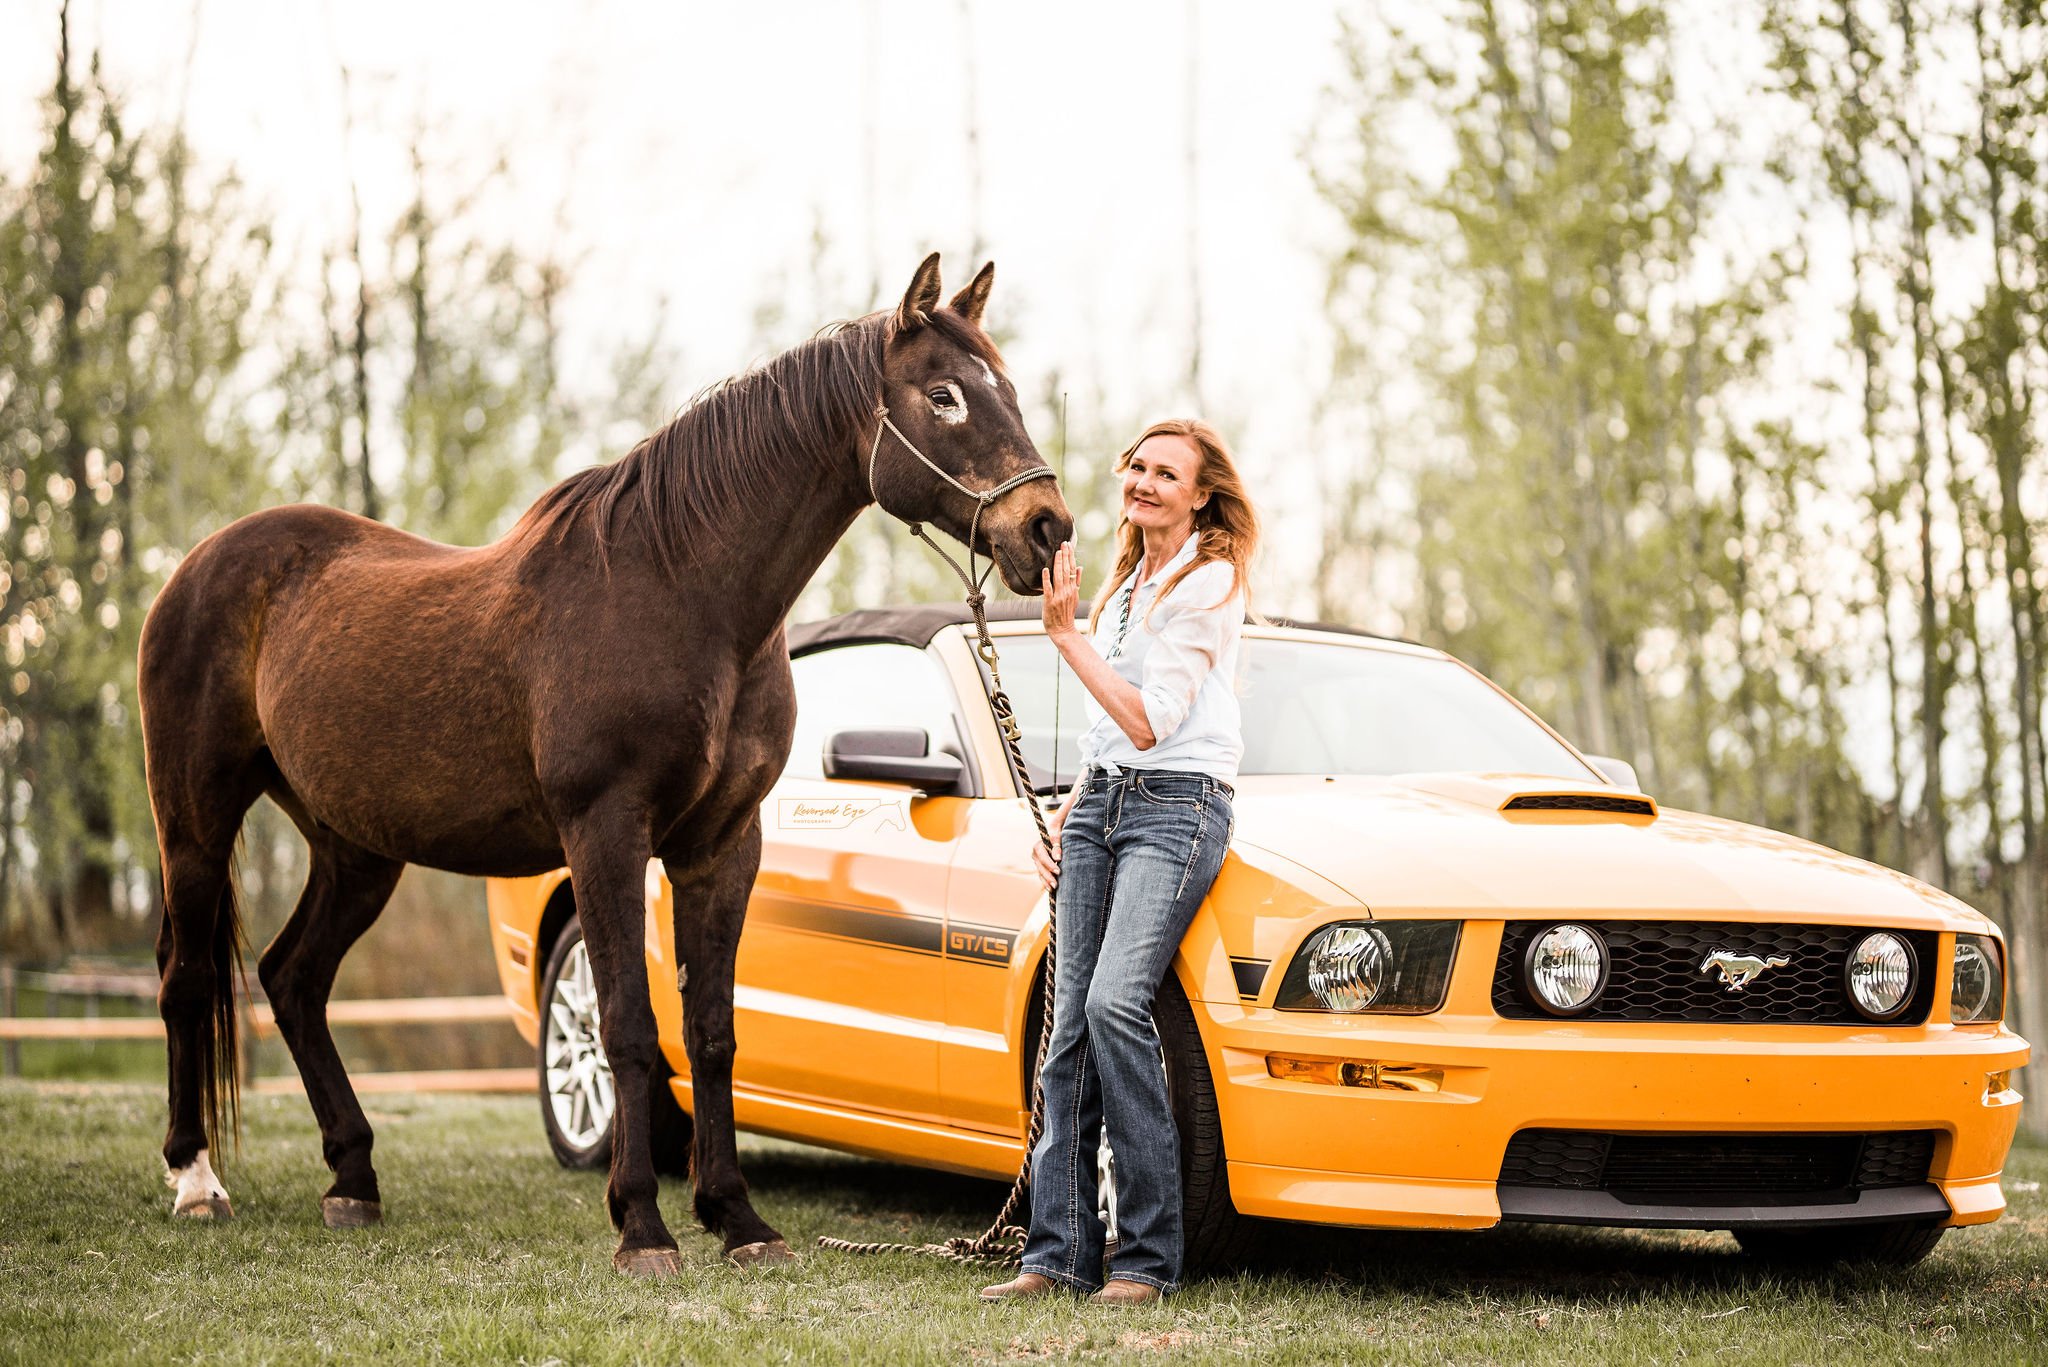 Woman and bay horse posing with orange mustang